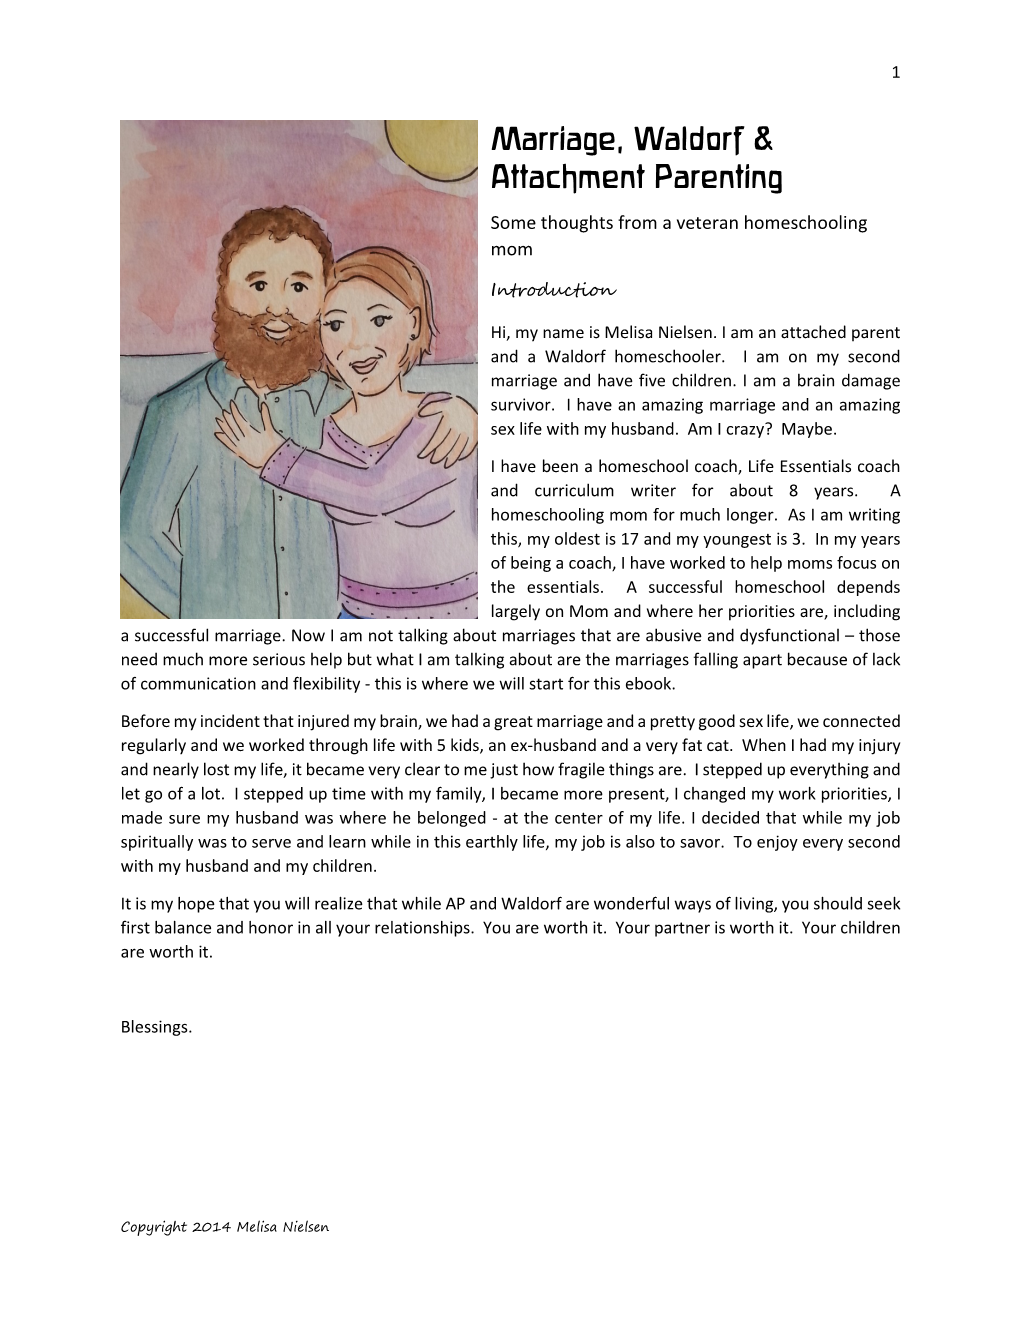 Marriage, Waldorf & Attachment Parenting